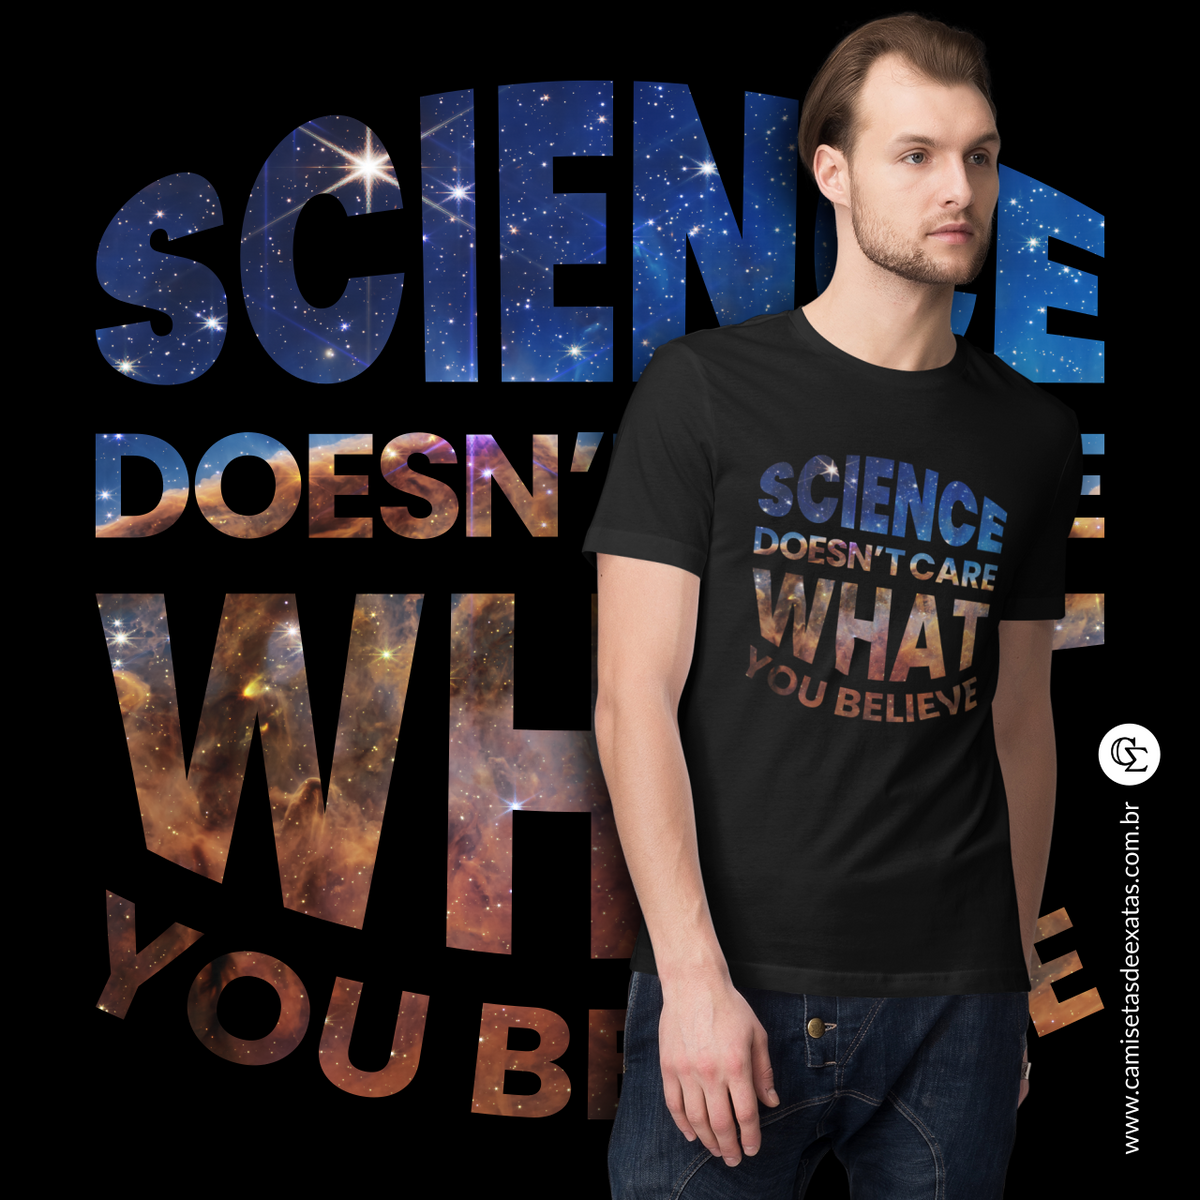 Nome do produto: SCIENCE DOESN\'T CARE WHAT YOU BELIEVE